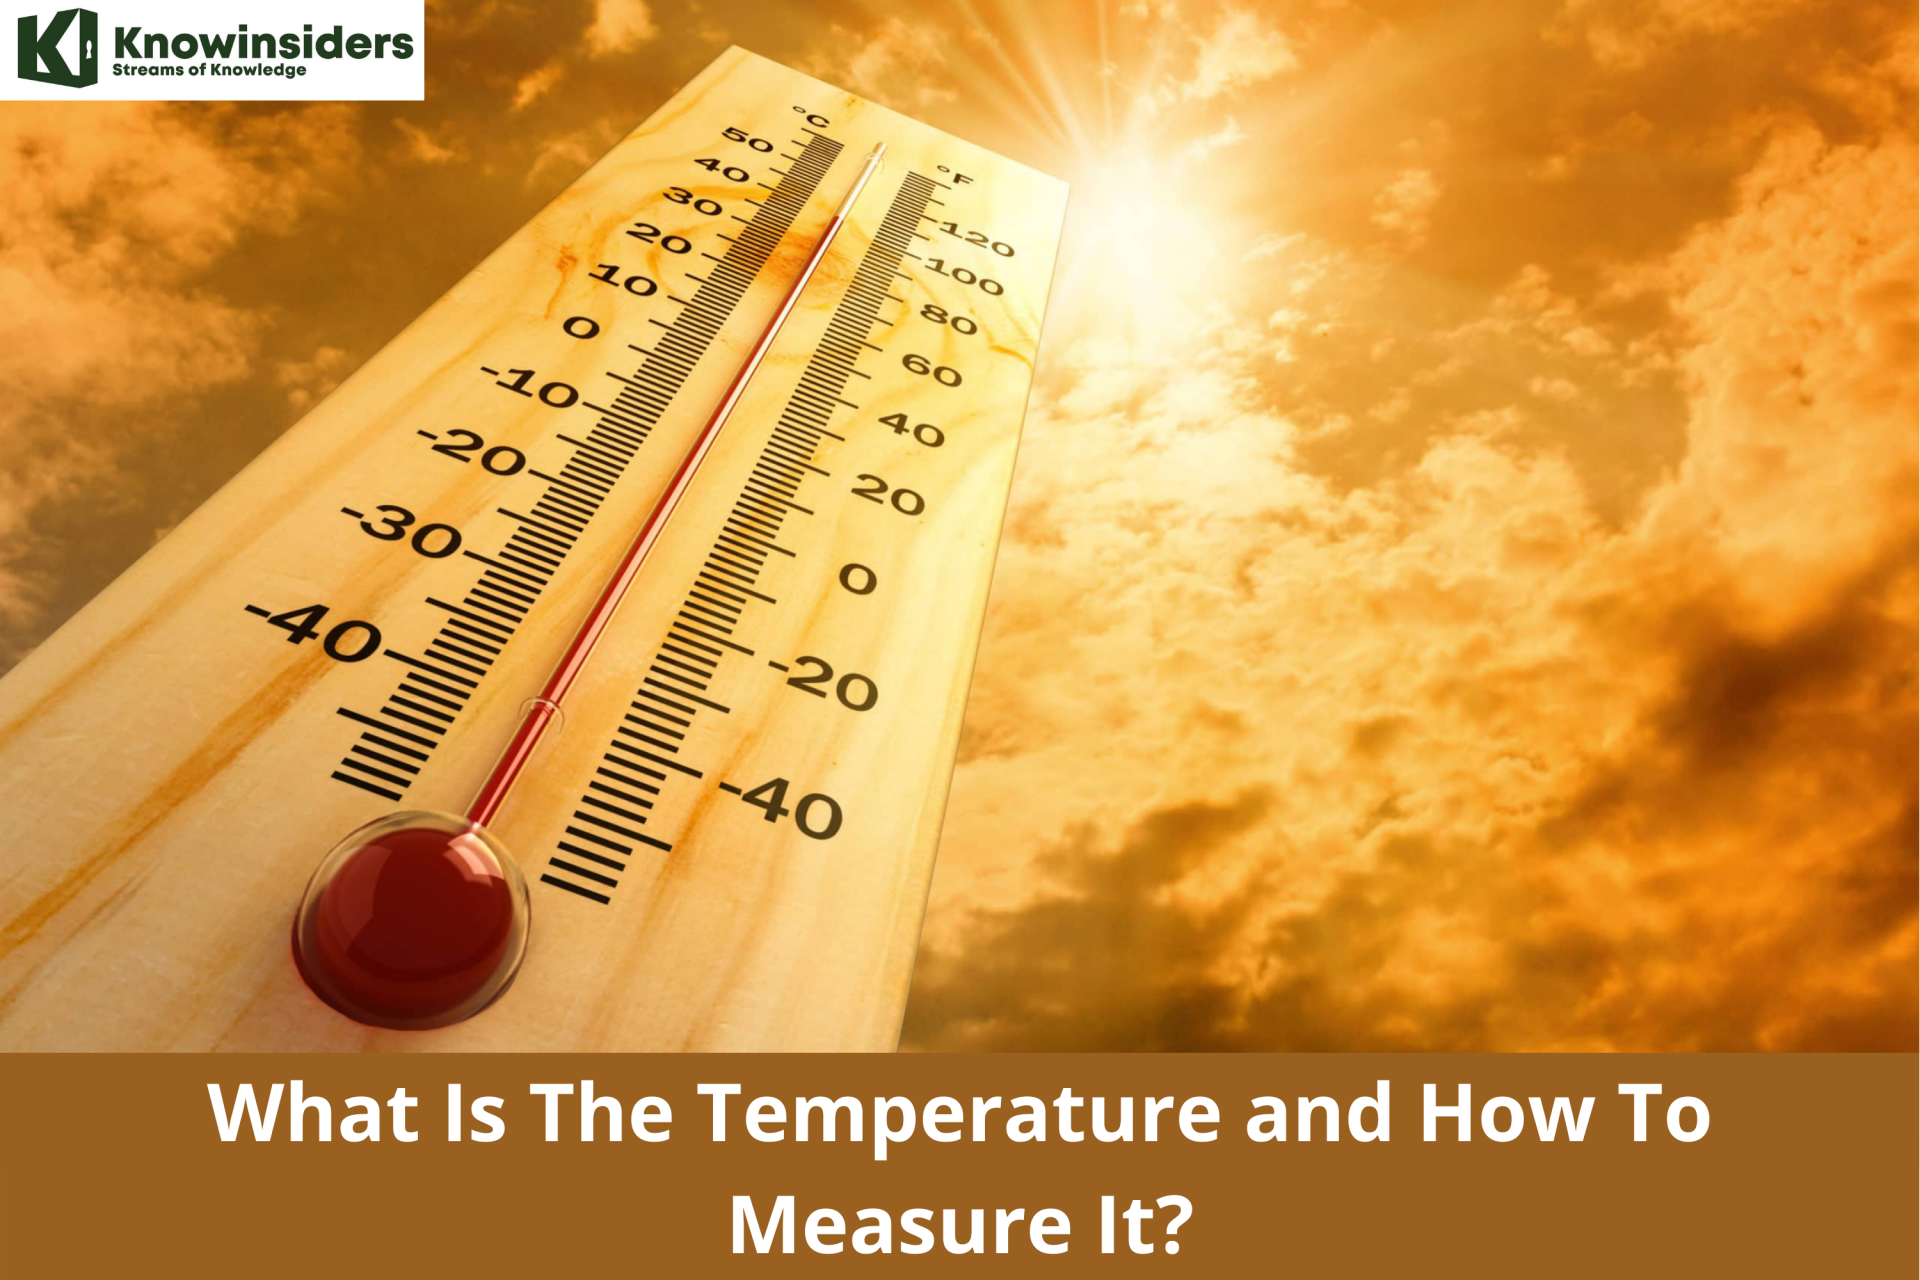 What Is The Body Temperature - How To Measure It?